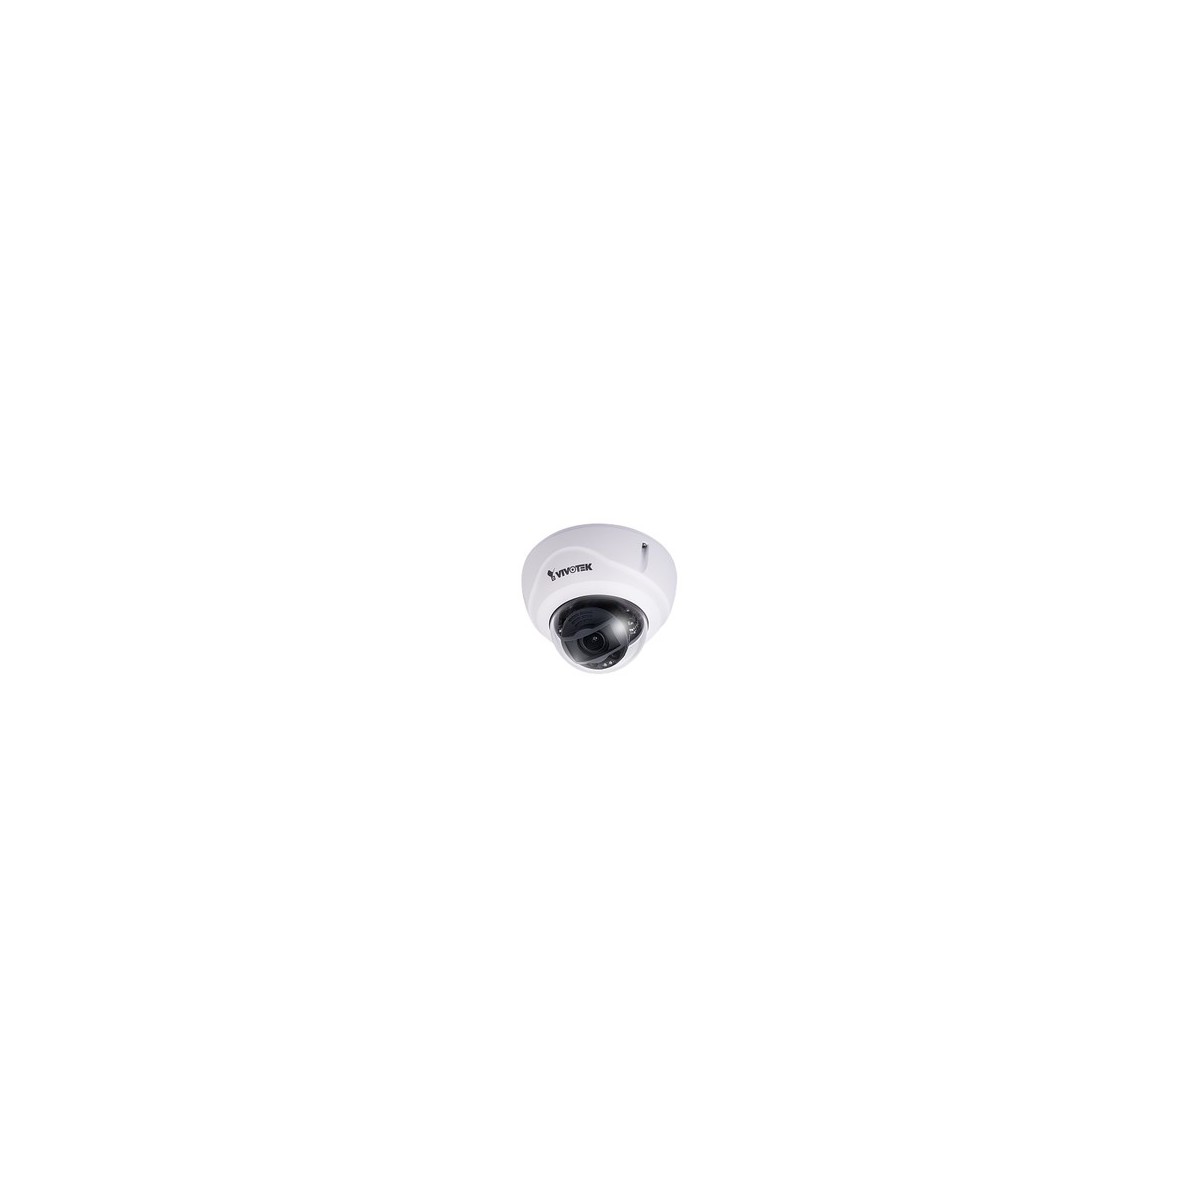 VIVOTEK FD9365-EHTV-A - IP security camera - Outdoor - Wired - Ceiling-wall - White - Dome